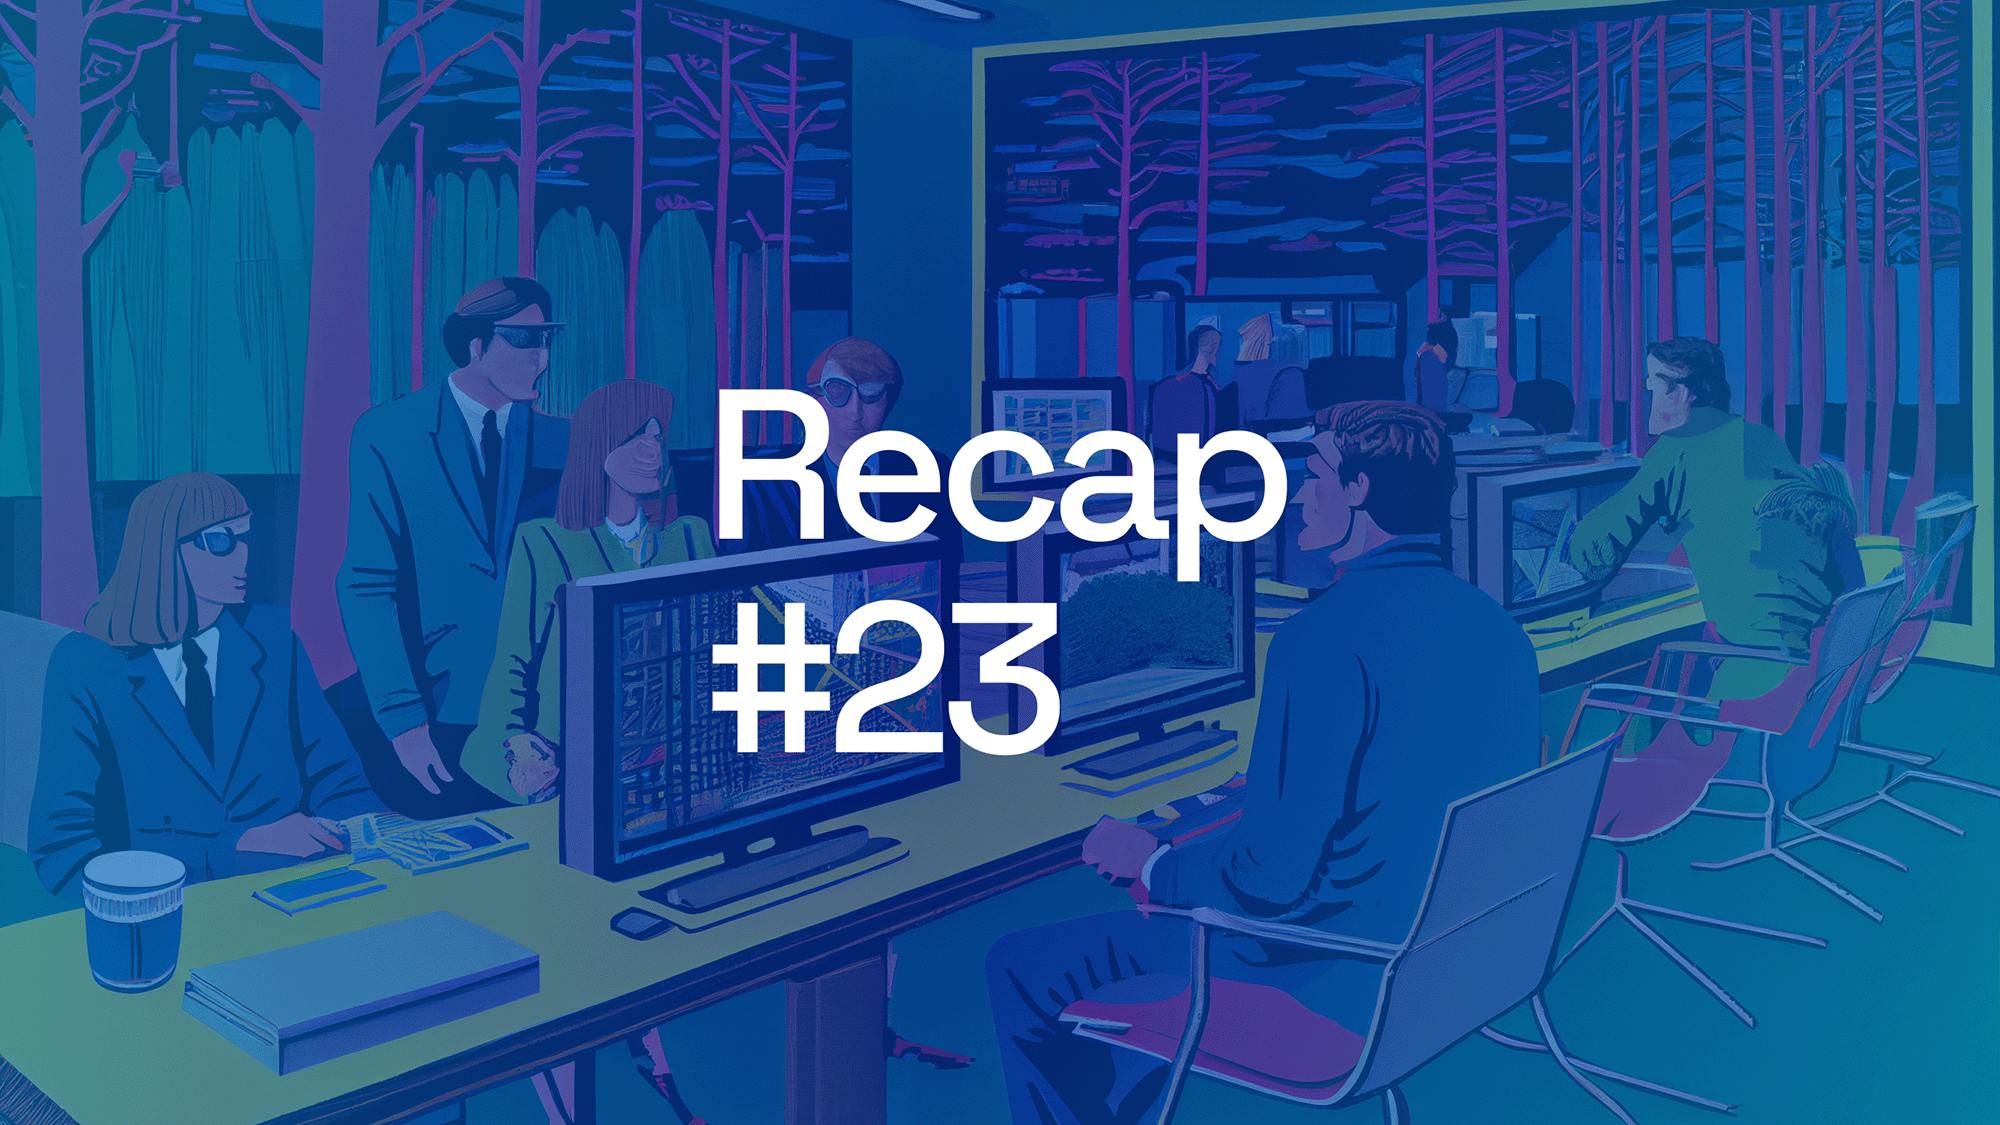 Weekly Recap #23 features earnings calls from Visa, Amazon, Meta, Microsoft, and Alphabet